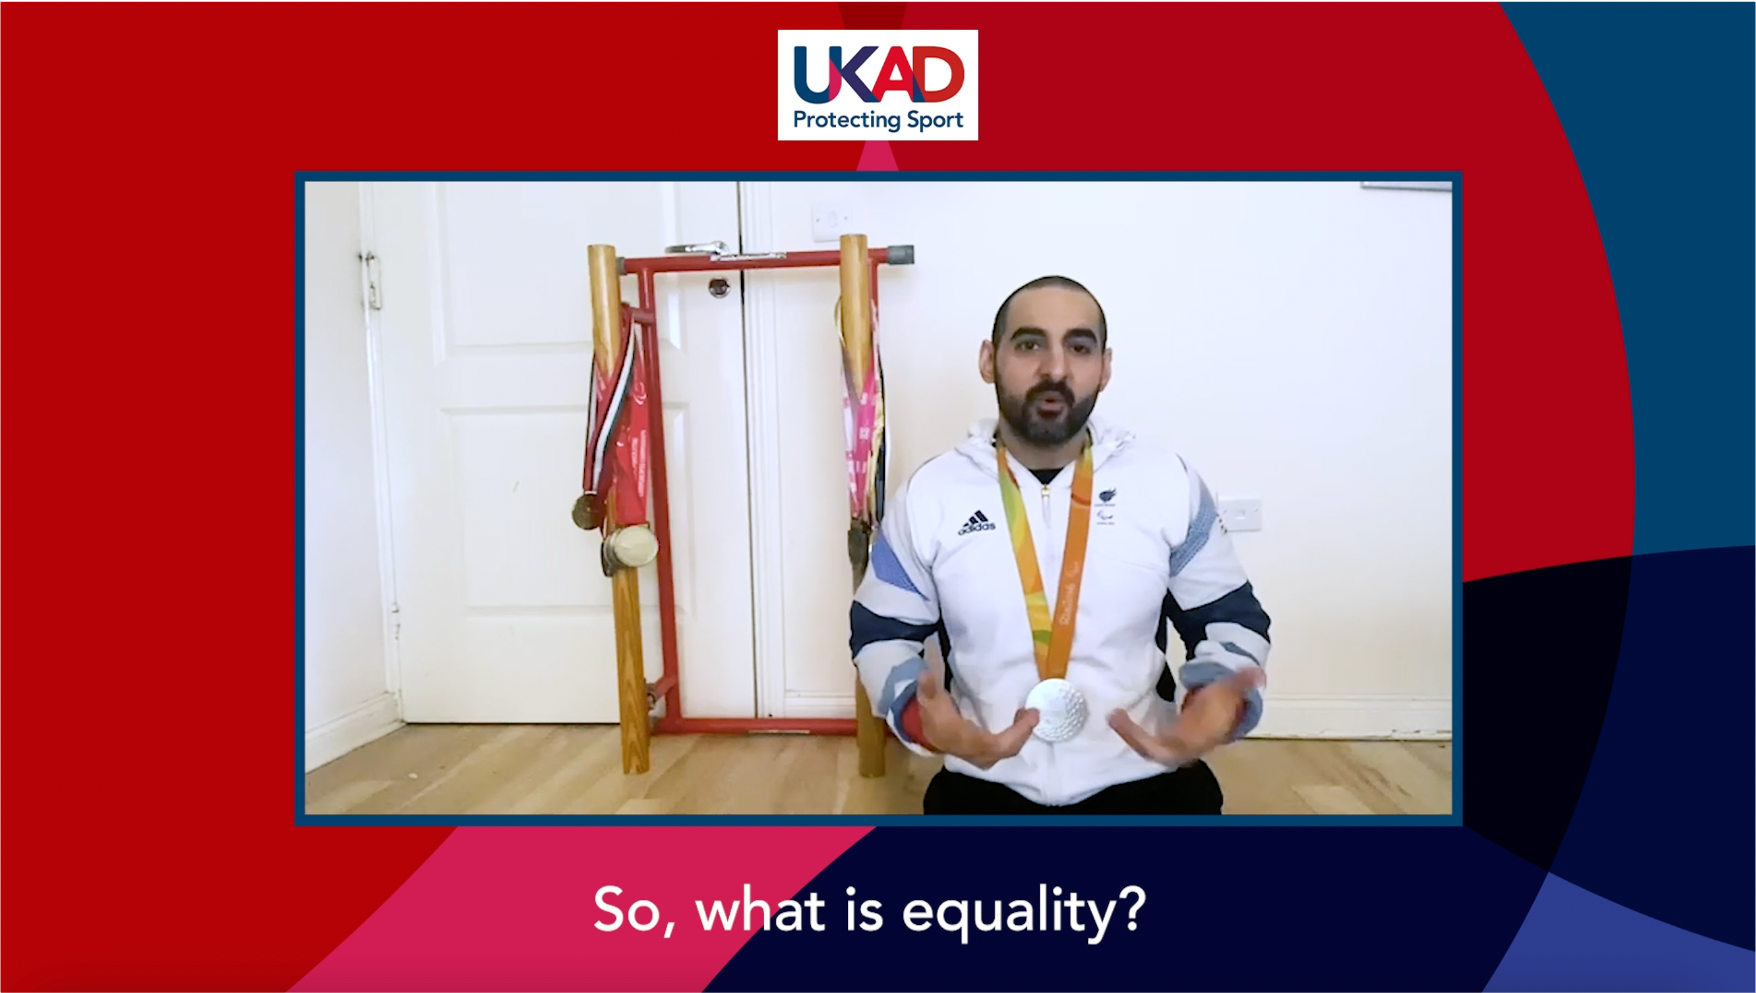 Explore equality with Paralympian Ali Jawad